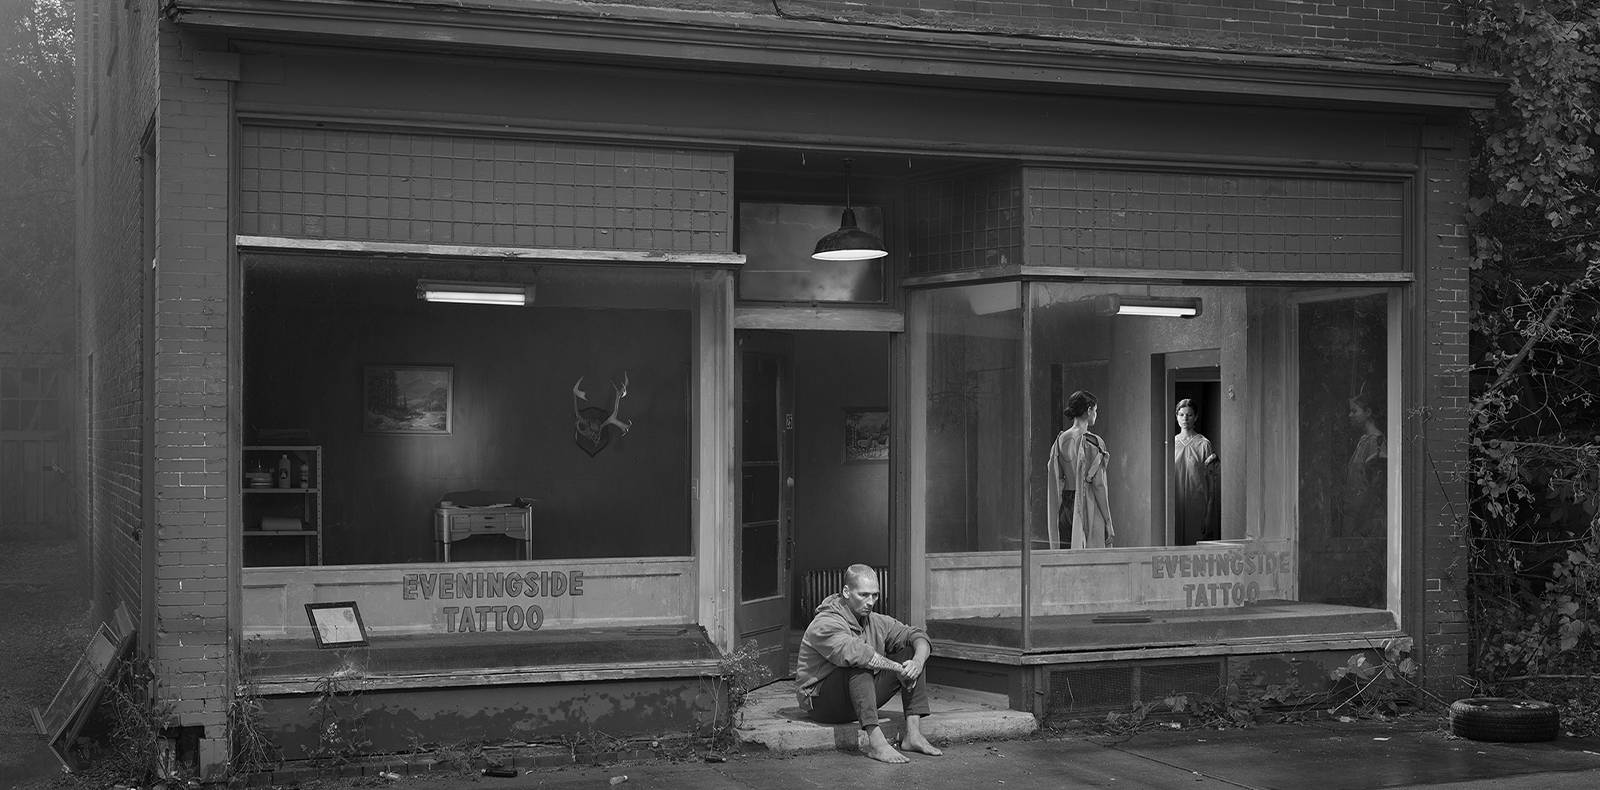 Gregory Crewdson, Evening side serie, Photographie, Interview, Exposition galerie Templon